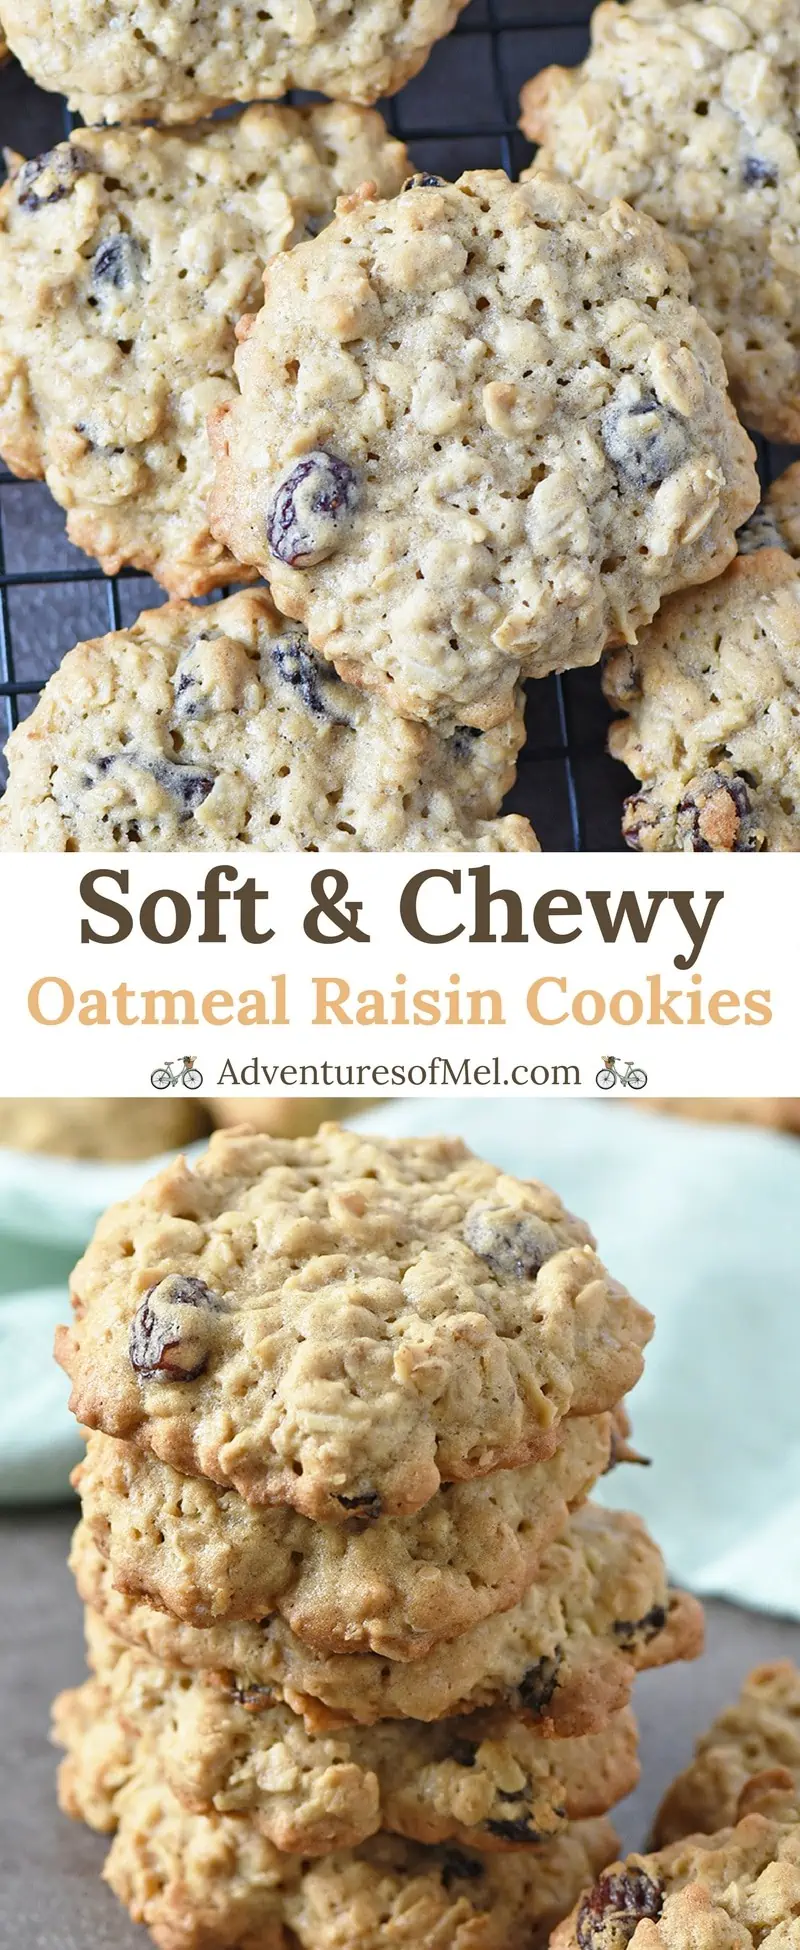 Oatmeal Raisin Cookies, made with brown sugar, cinnamon, and oatmeal, have a crispy outer edge and a soft, chewy middle. Delicious cookie recipe!